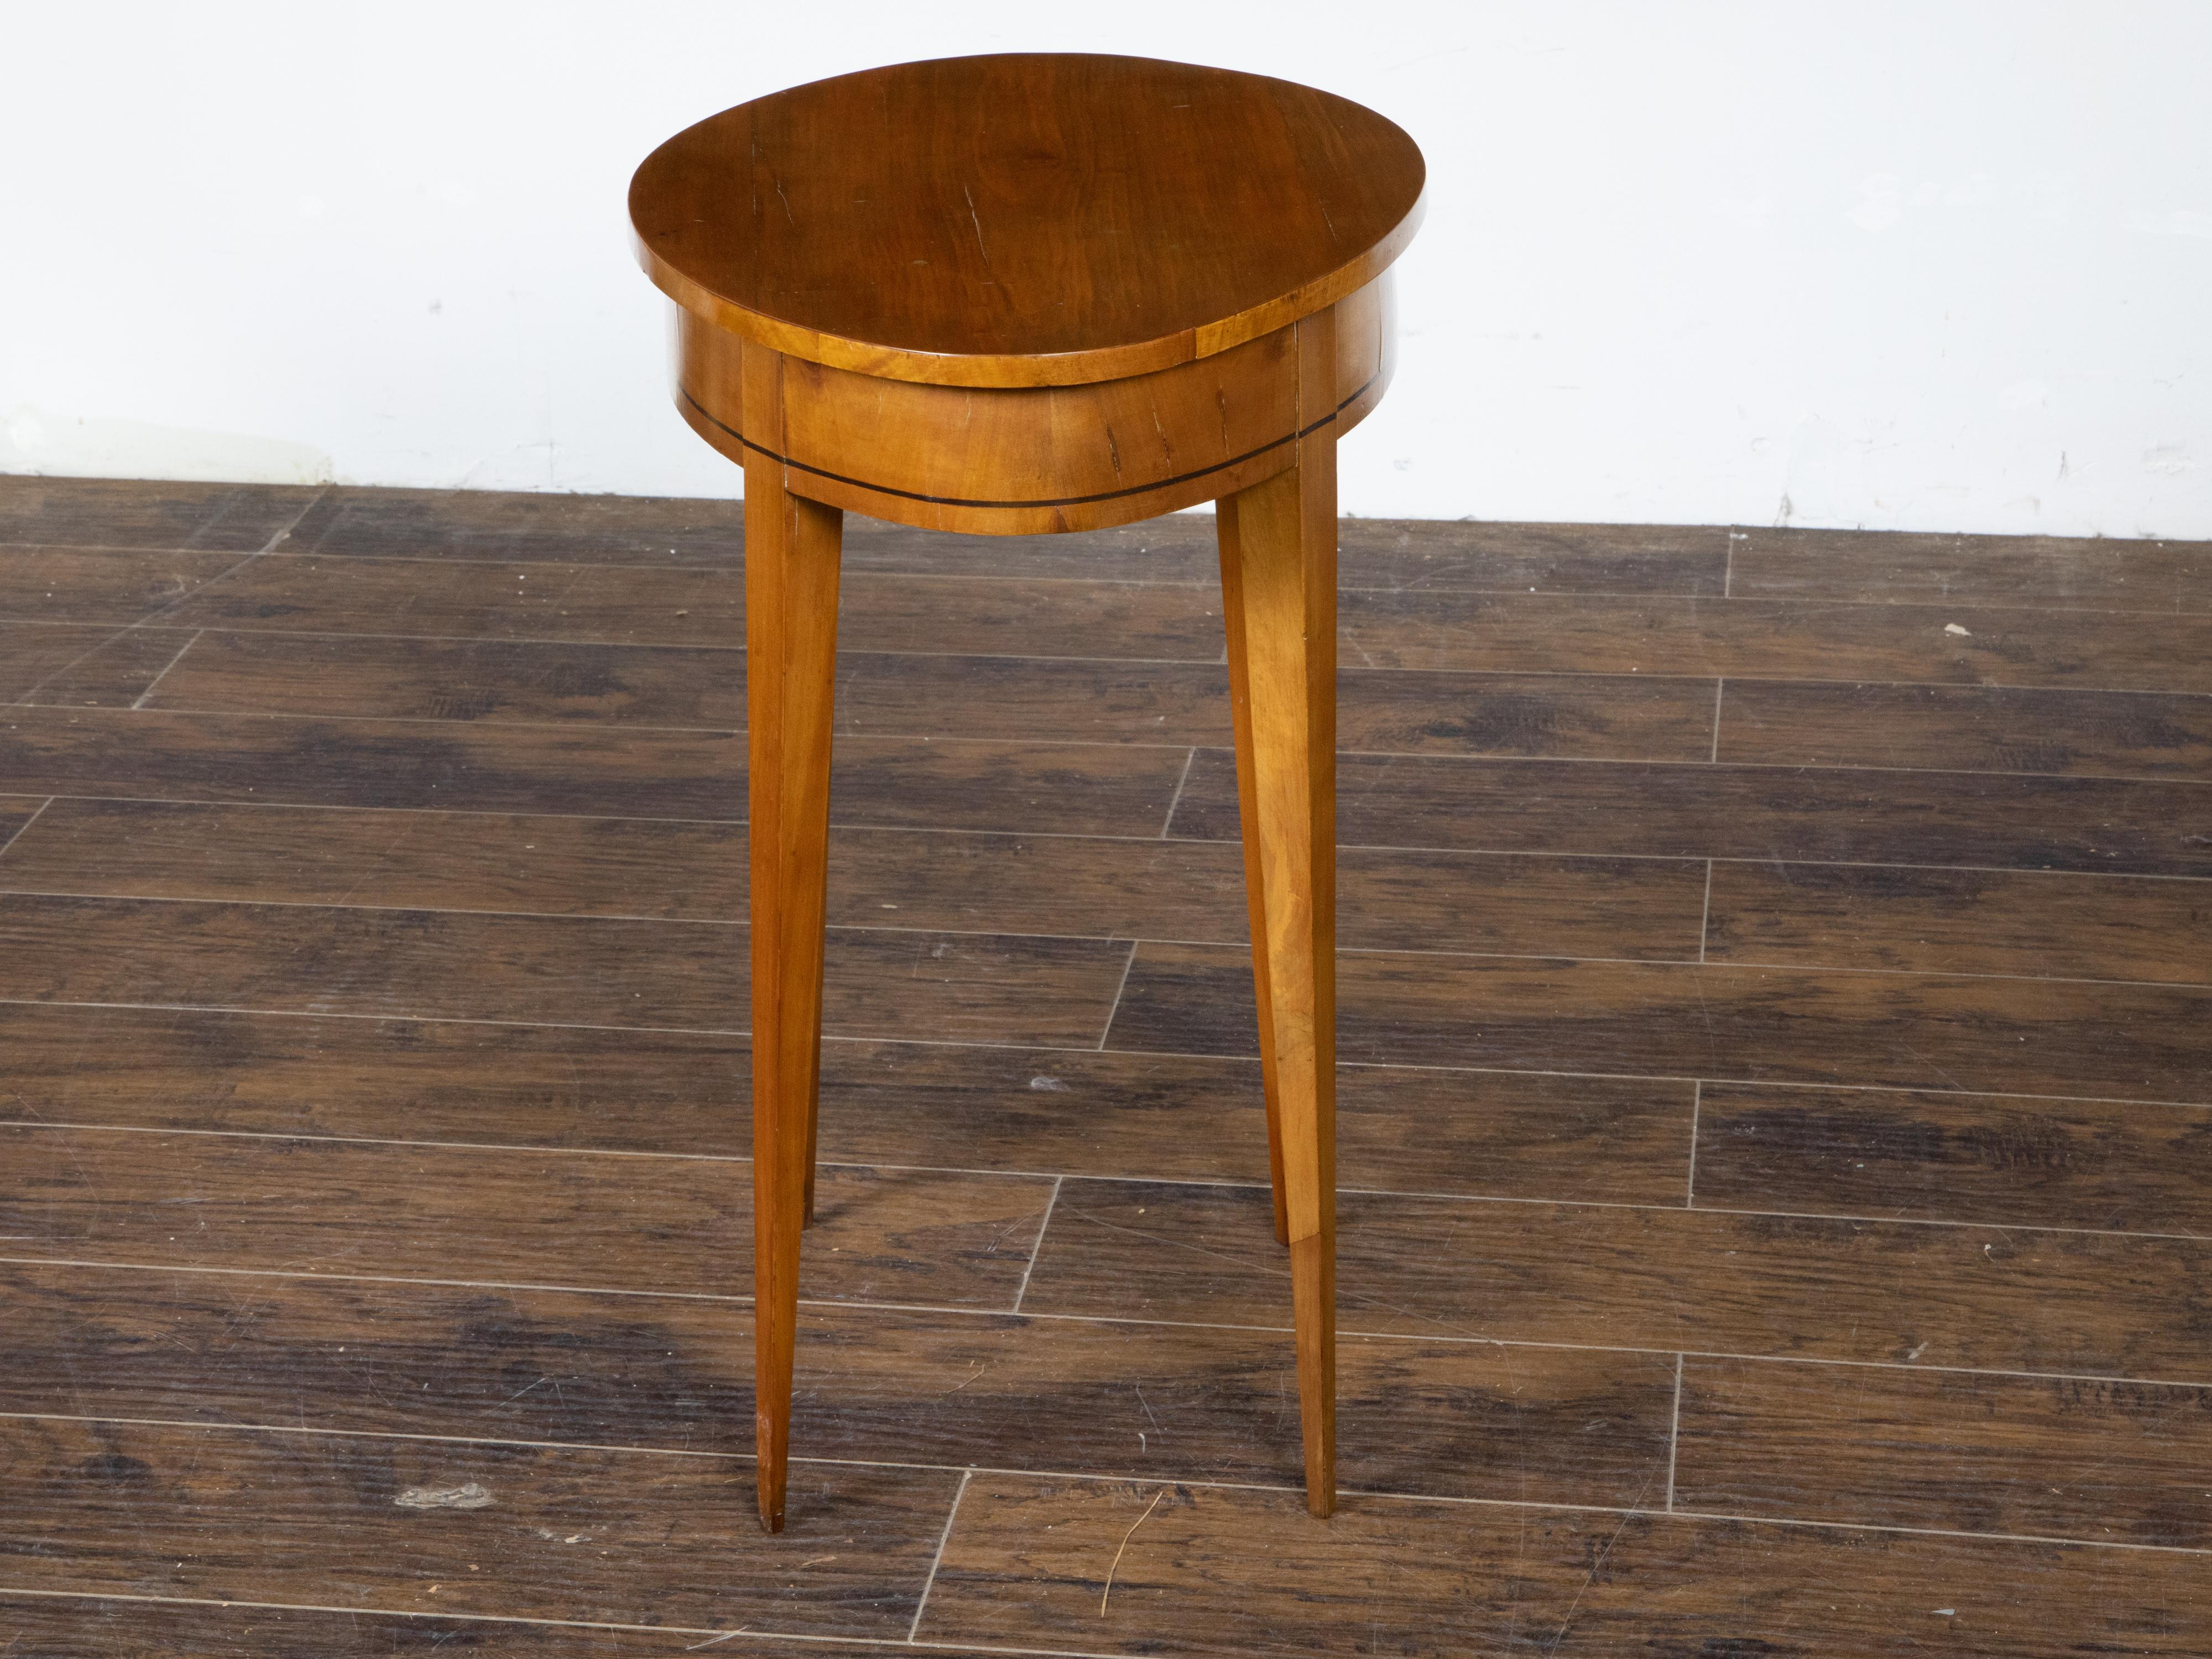 A French Neoclassical style walnut side table from the 19th century, with almond shaped top, ebonized accents and tapered legs. Created in France during the 19th century, this walnut veneered side table features an unusual almond shaped top sitting